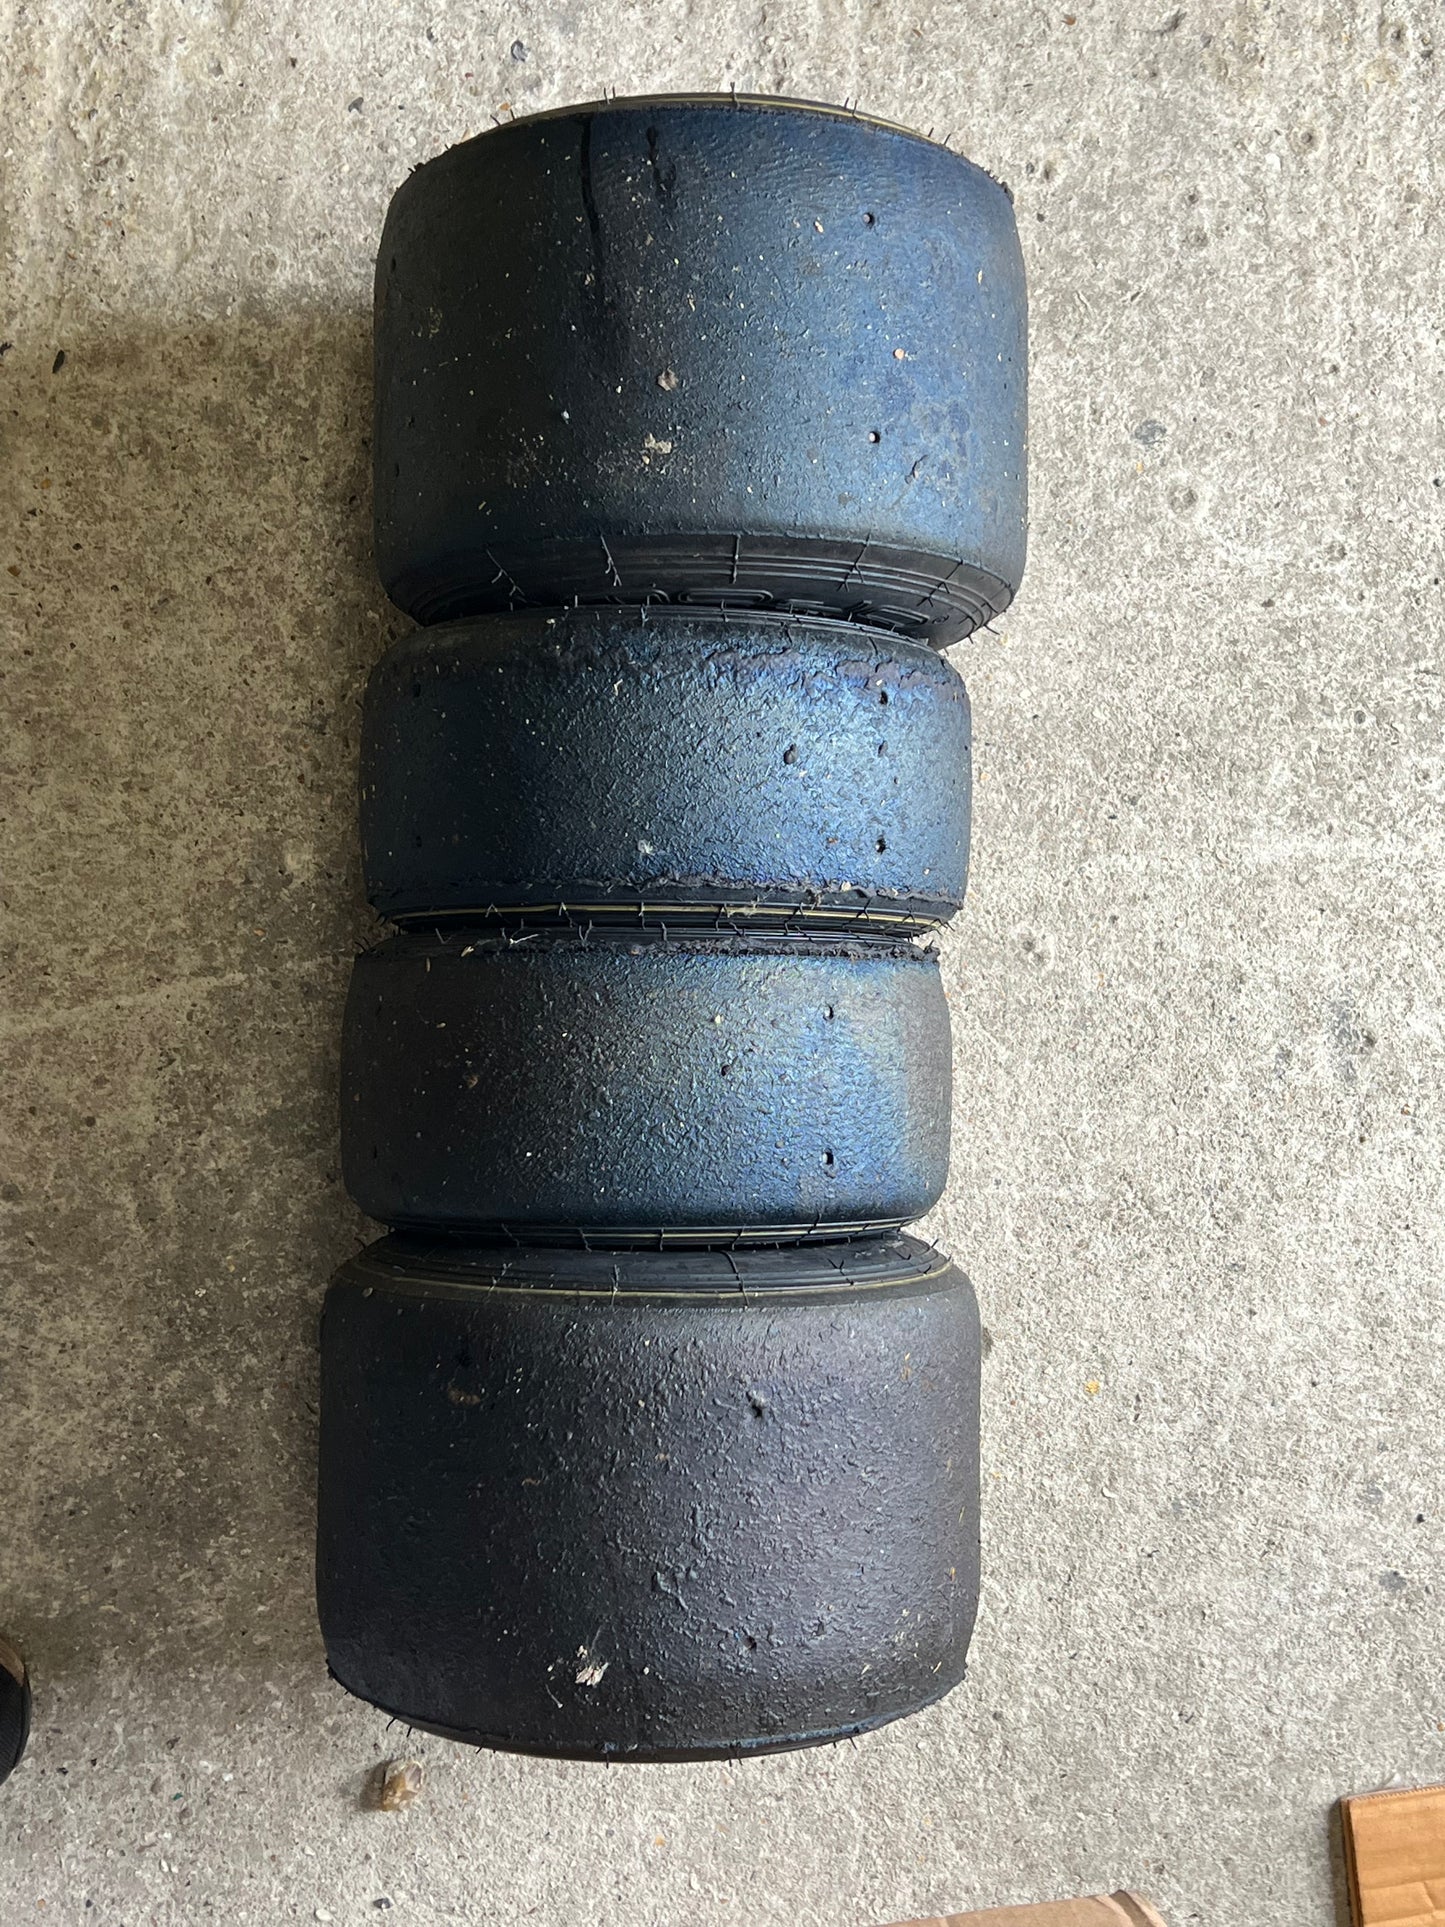 MOJO D5 TYRES USED 60 laps